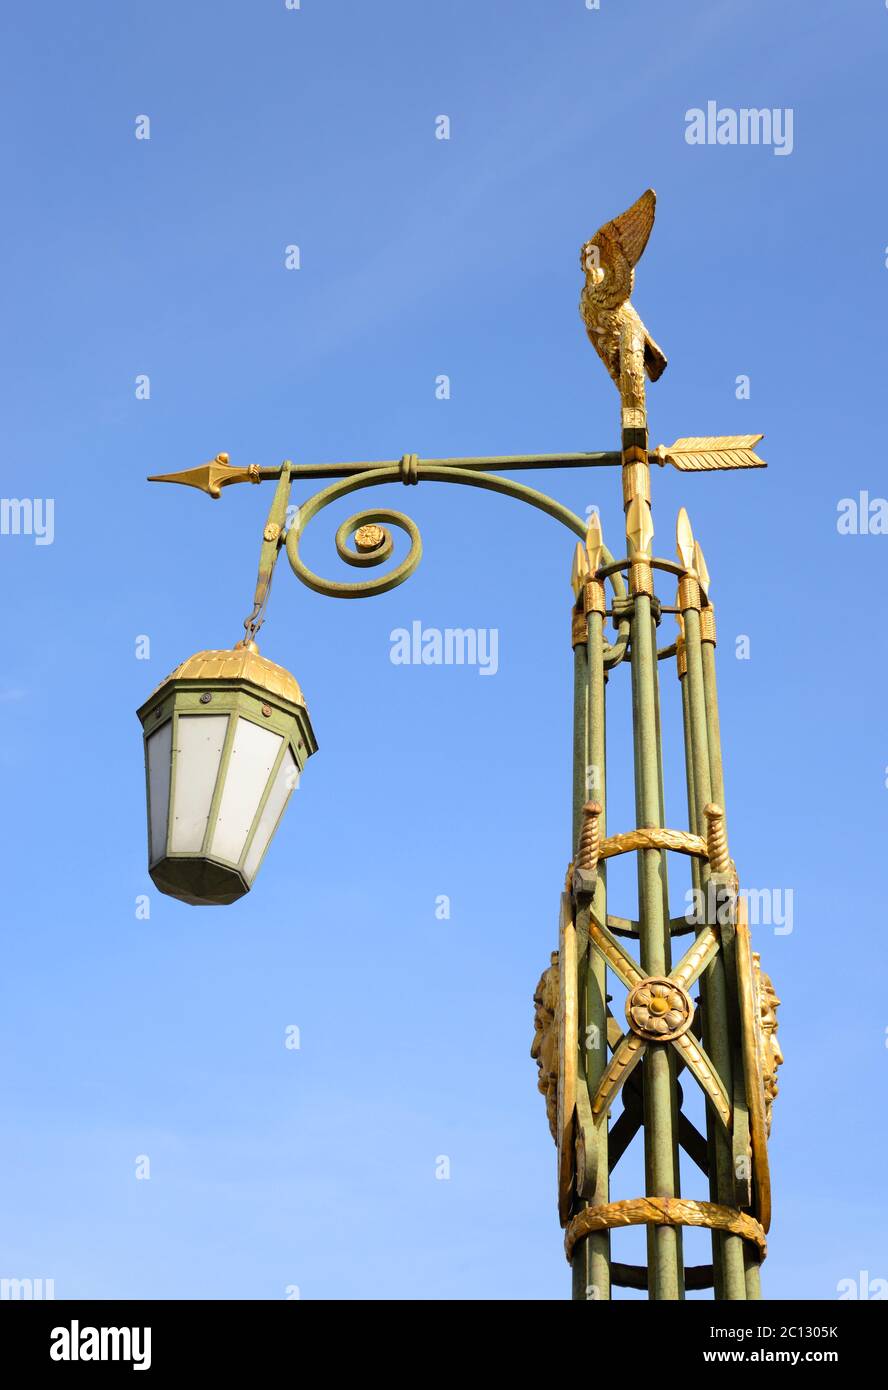 Street lamp in the old style. Stock Photo